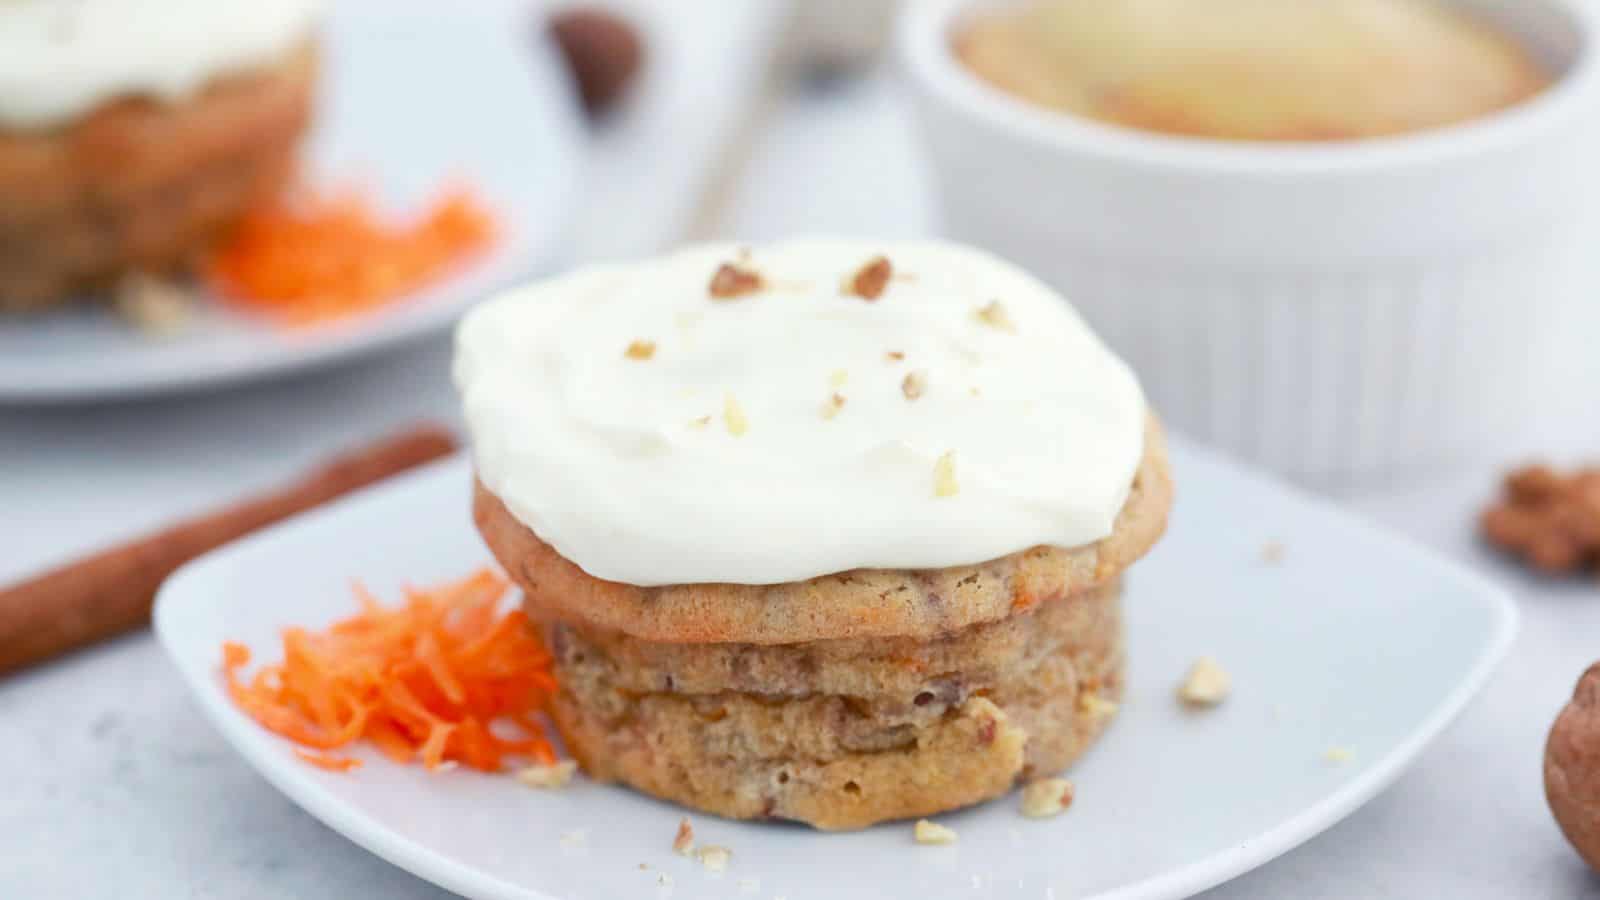 Carrot cake muffin topped with cream cheese frosting and chopped nuts, served on a white plate with grated carrot and walnuts nearby.